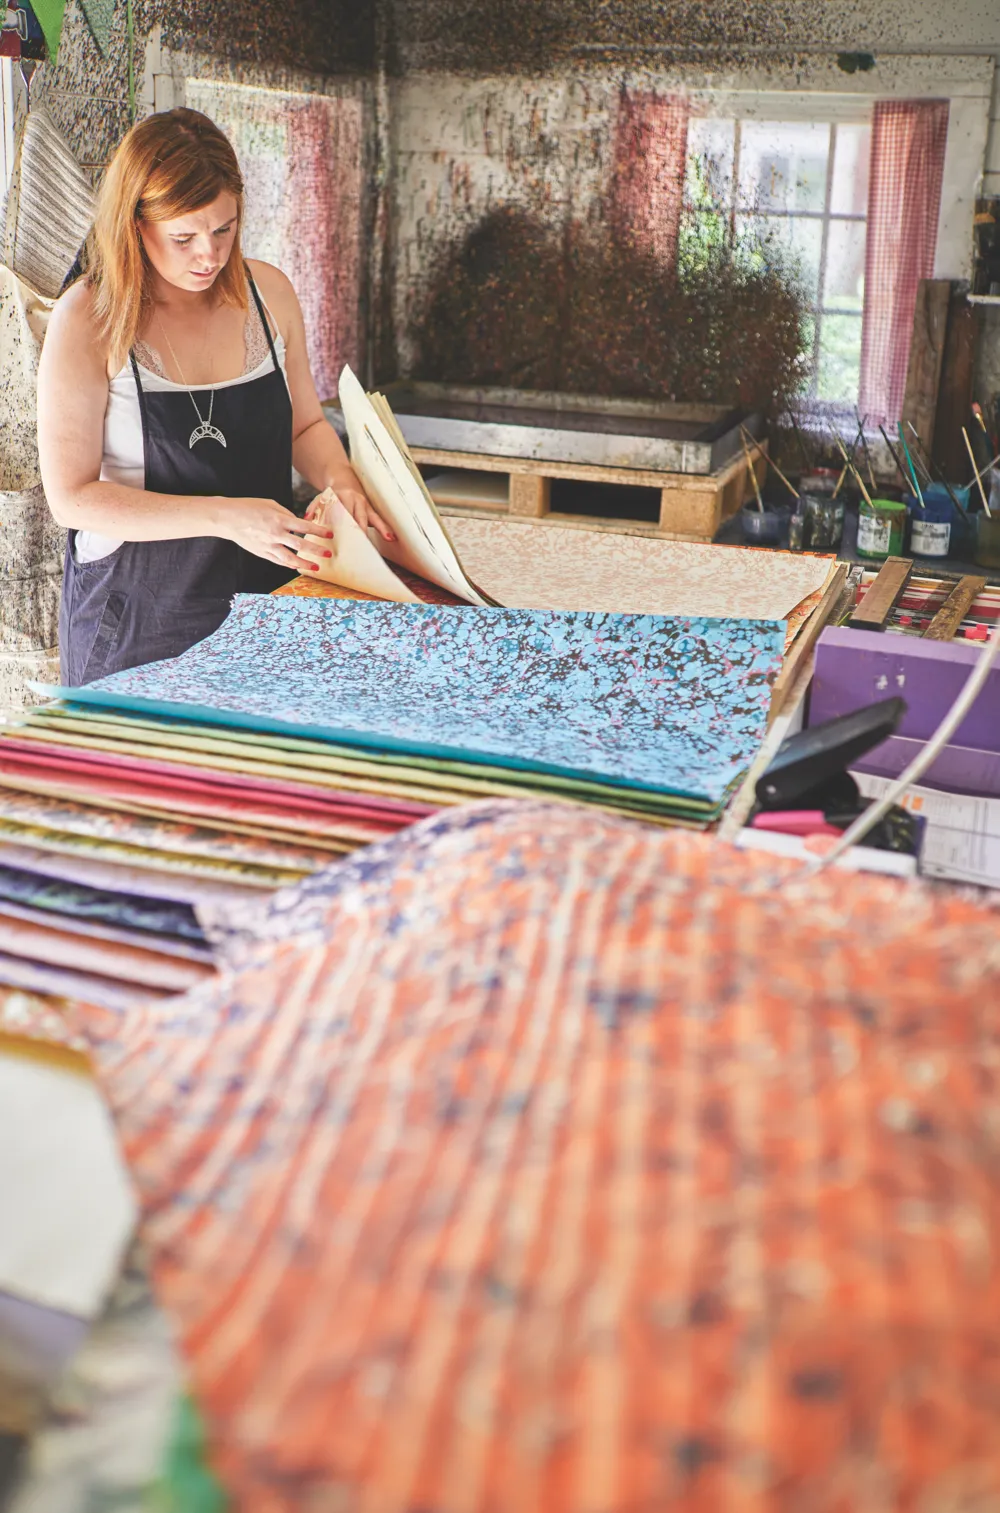 Jemma in her back garden workshop, surrounded by piles of richly marbled papers